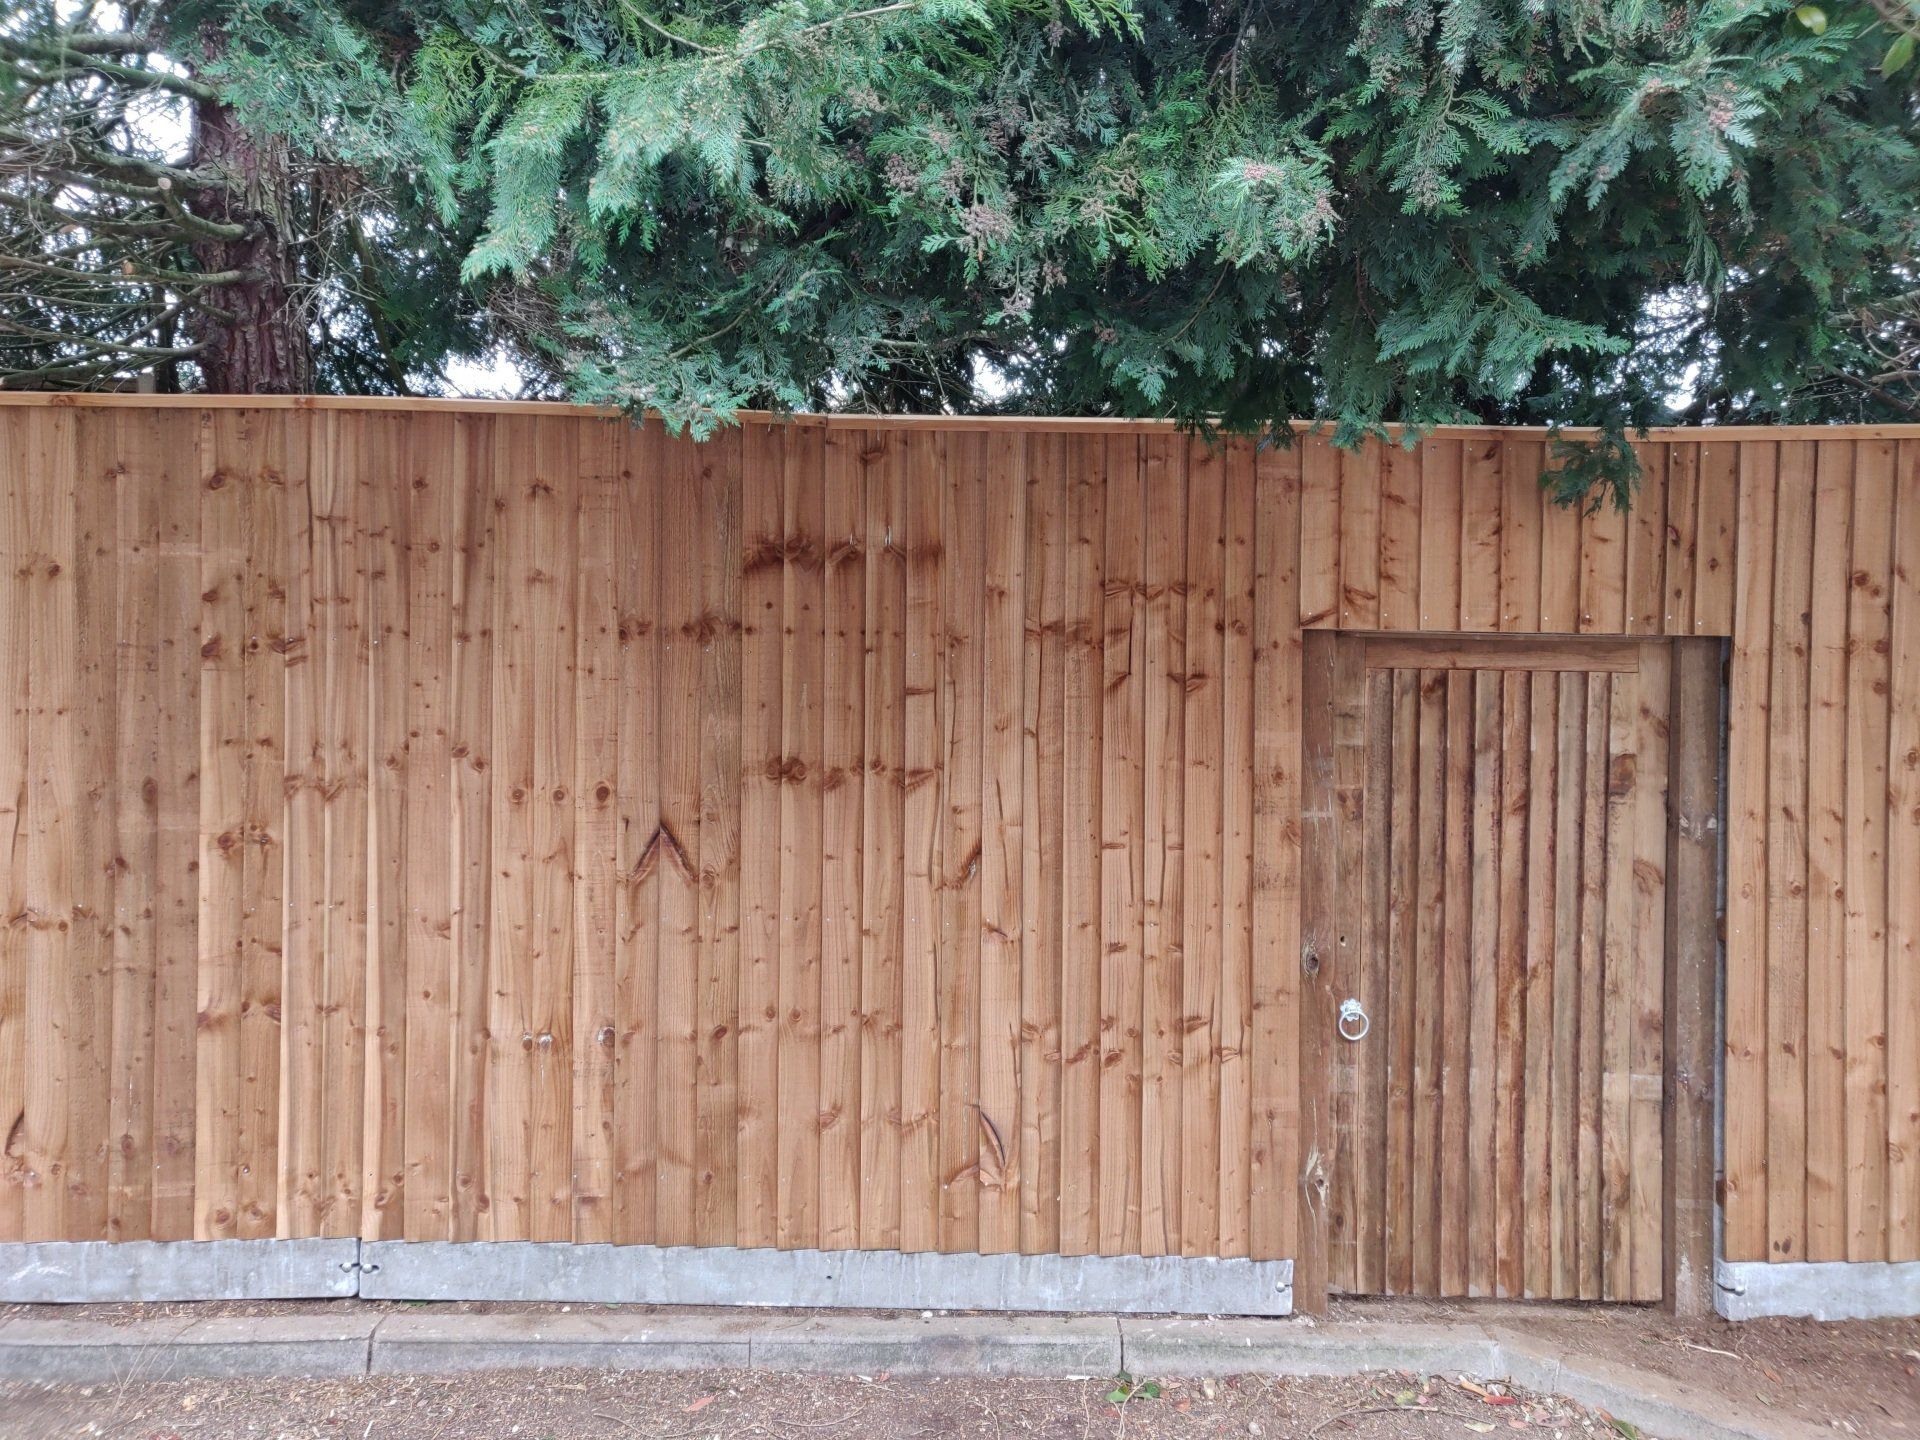 Standard size gate set into a very tall fence with fencing above gate.